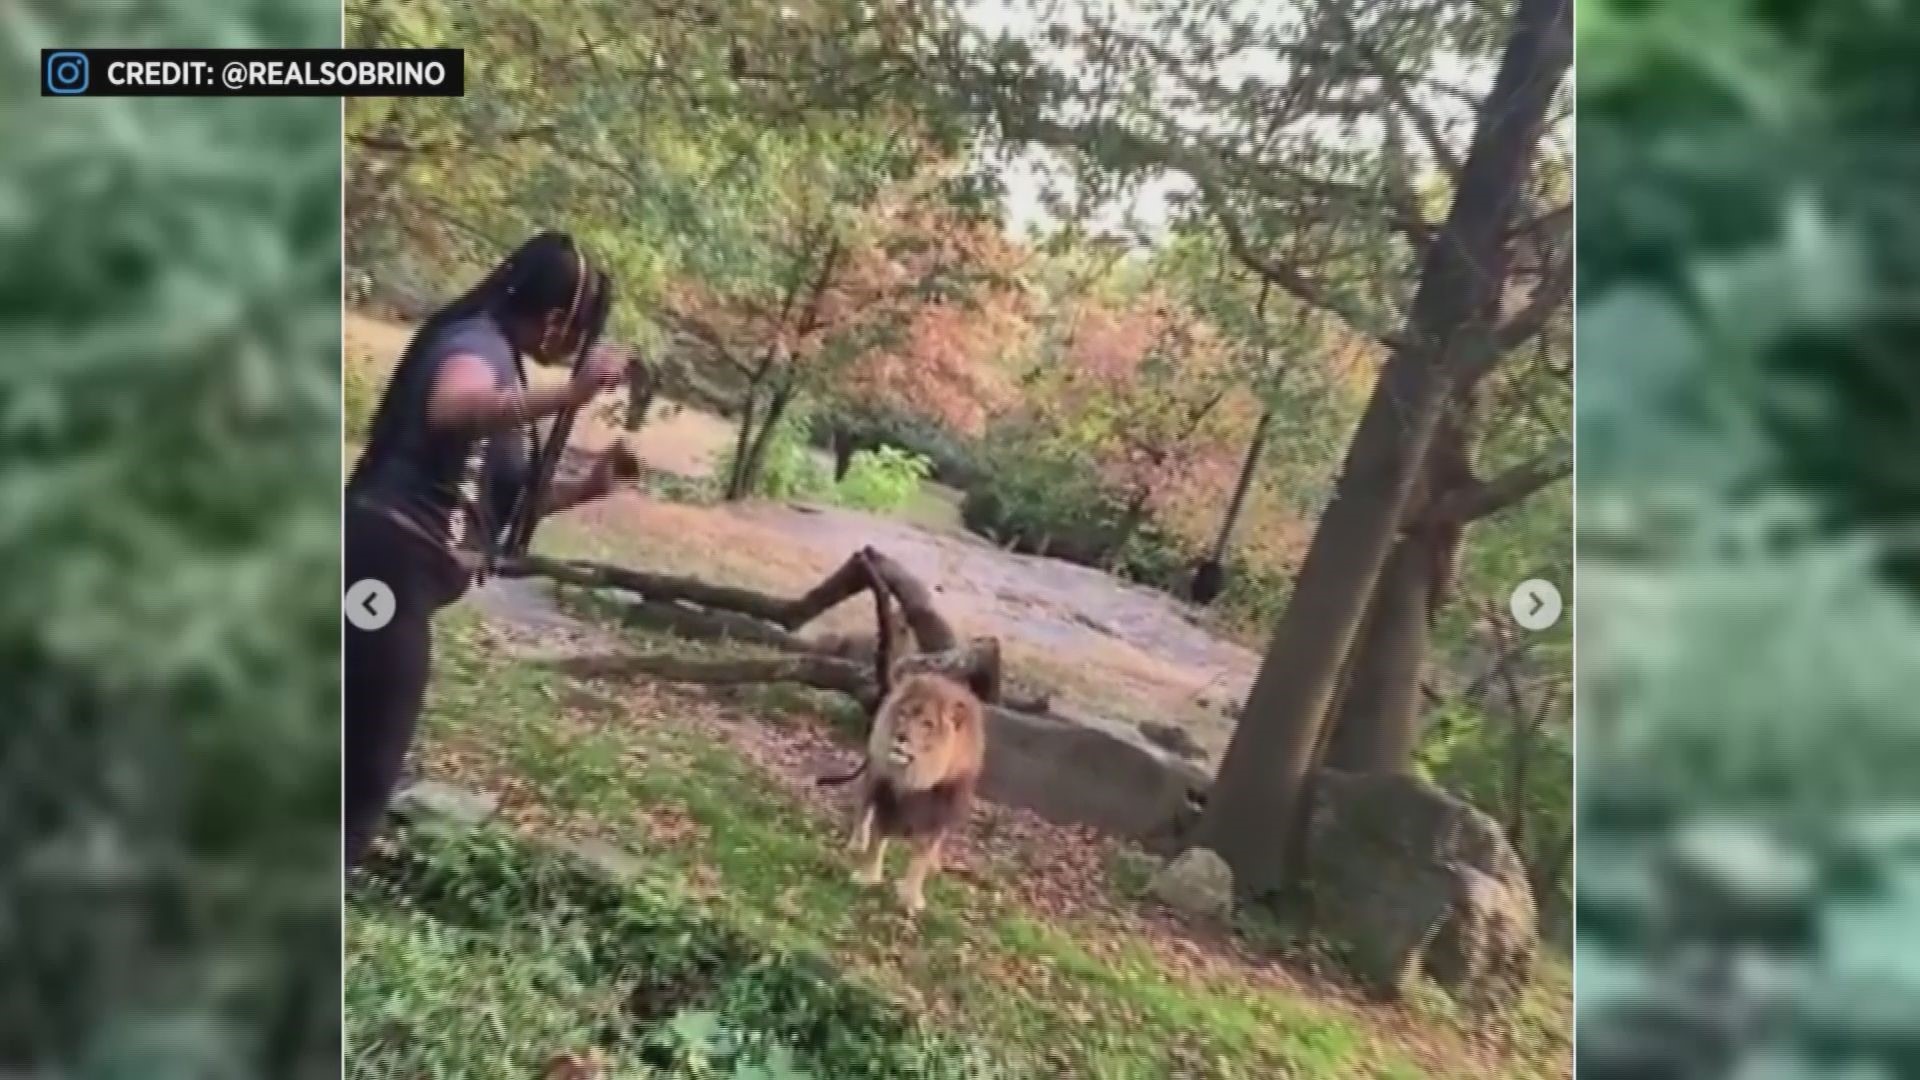 Police are searching for a woman who got past the lion enclosure fence at the Bronx Zoo and appeared to taunt the animal, CBS New York reports.